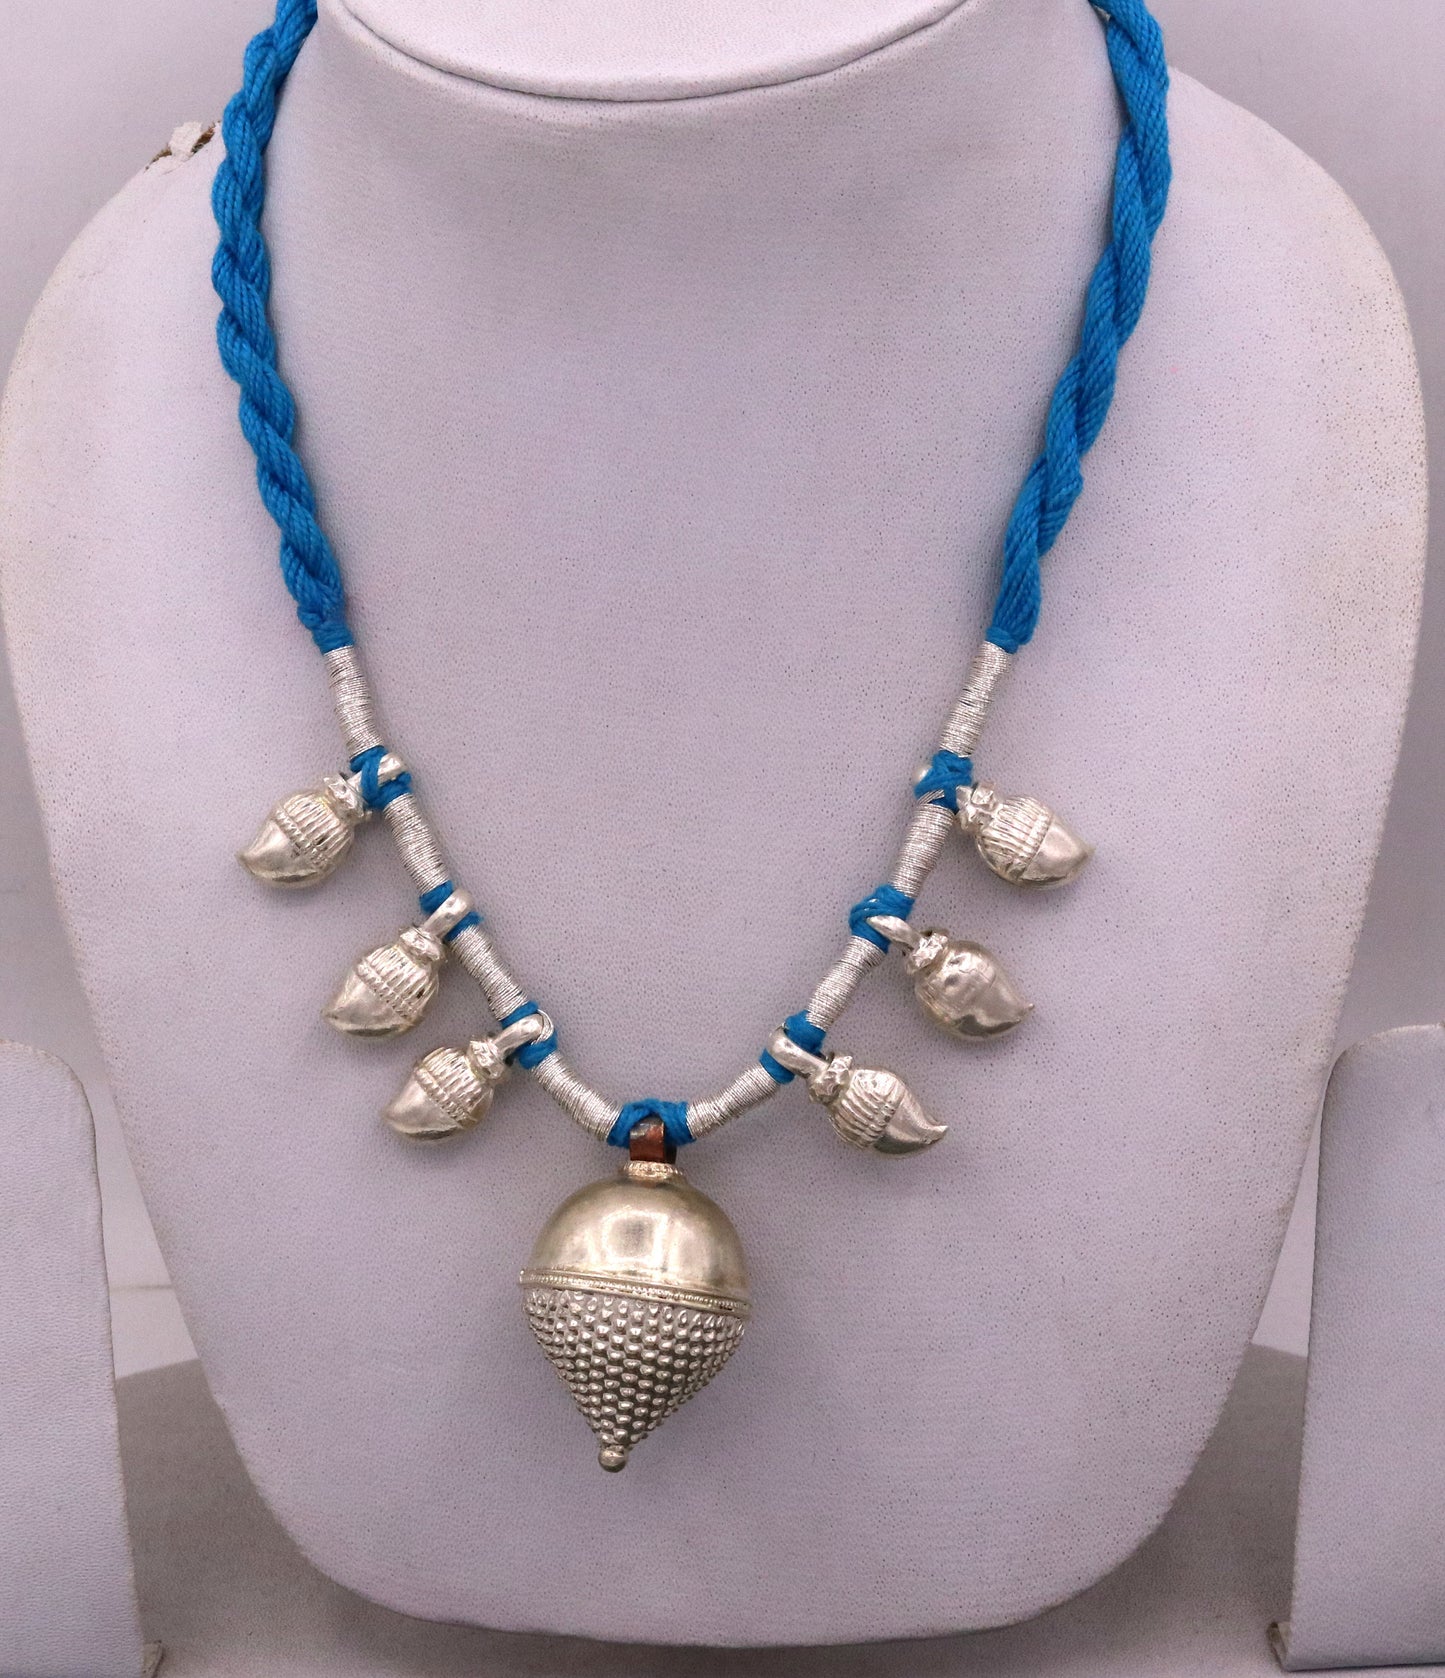 Vintage antique design sterling silver gorgeous necklace stylish tribal necklace belly dance jewelry set32 - TRIBAL ORNAMENTS